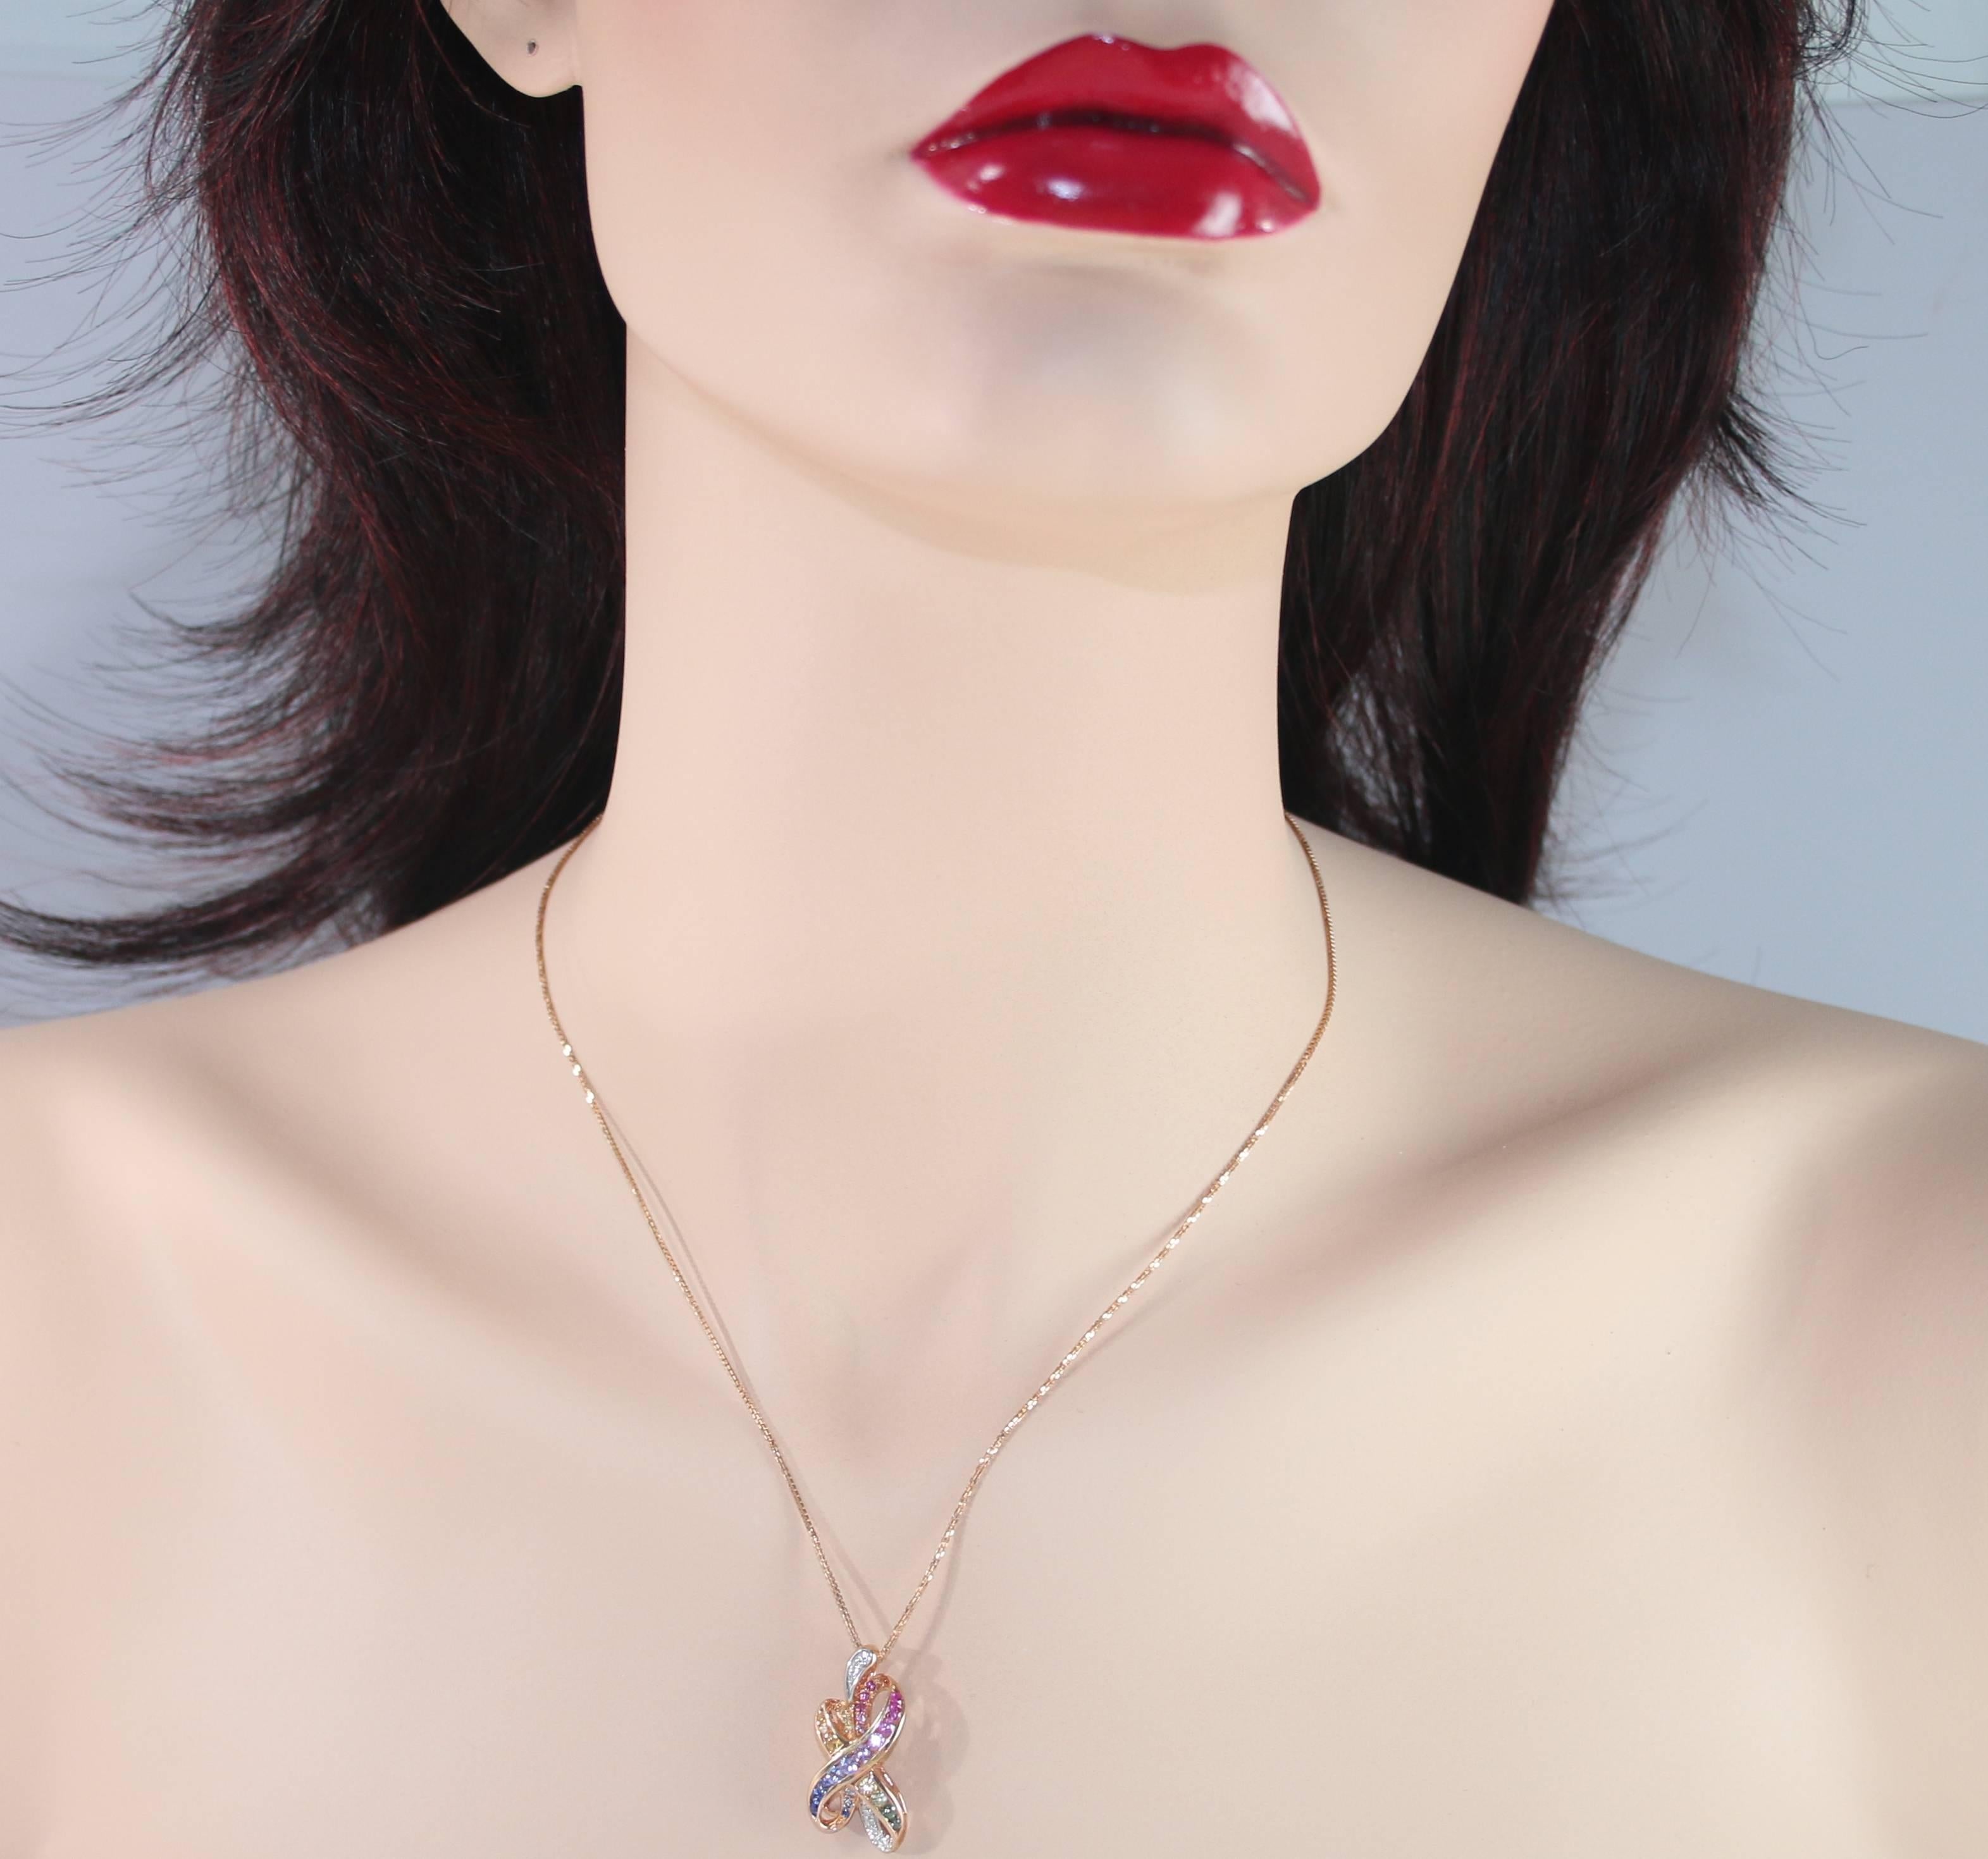 Beautiful Pendant Necklace.
The Pendant & Chain are 18K Rose Gold.
The pendant has 1.11 Carats In Sapphires.
There is also 0.06 Carats in Diamonds G VS/SI.
The pendant measures 1